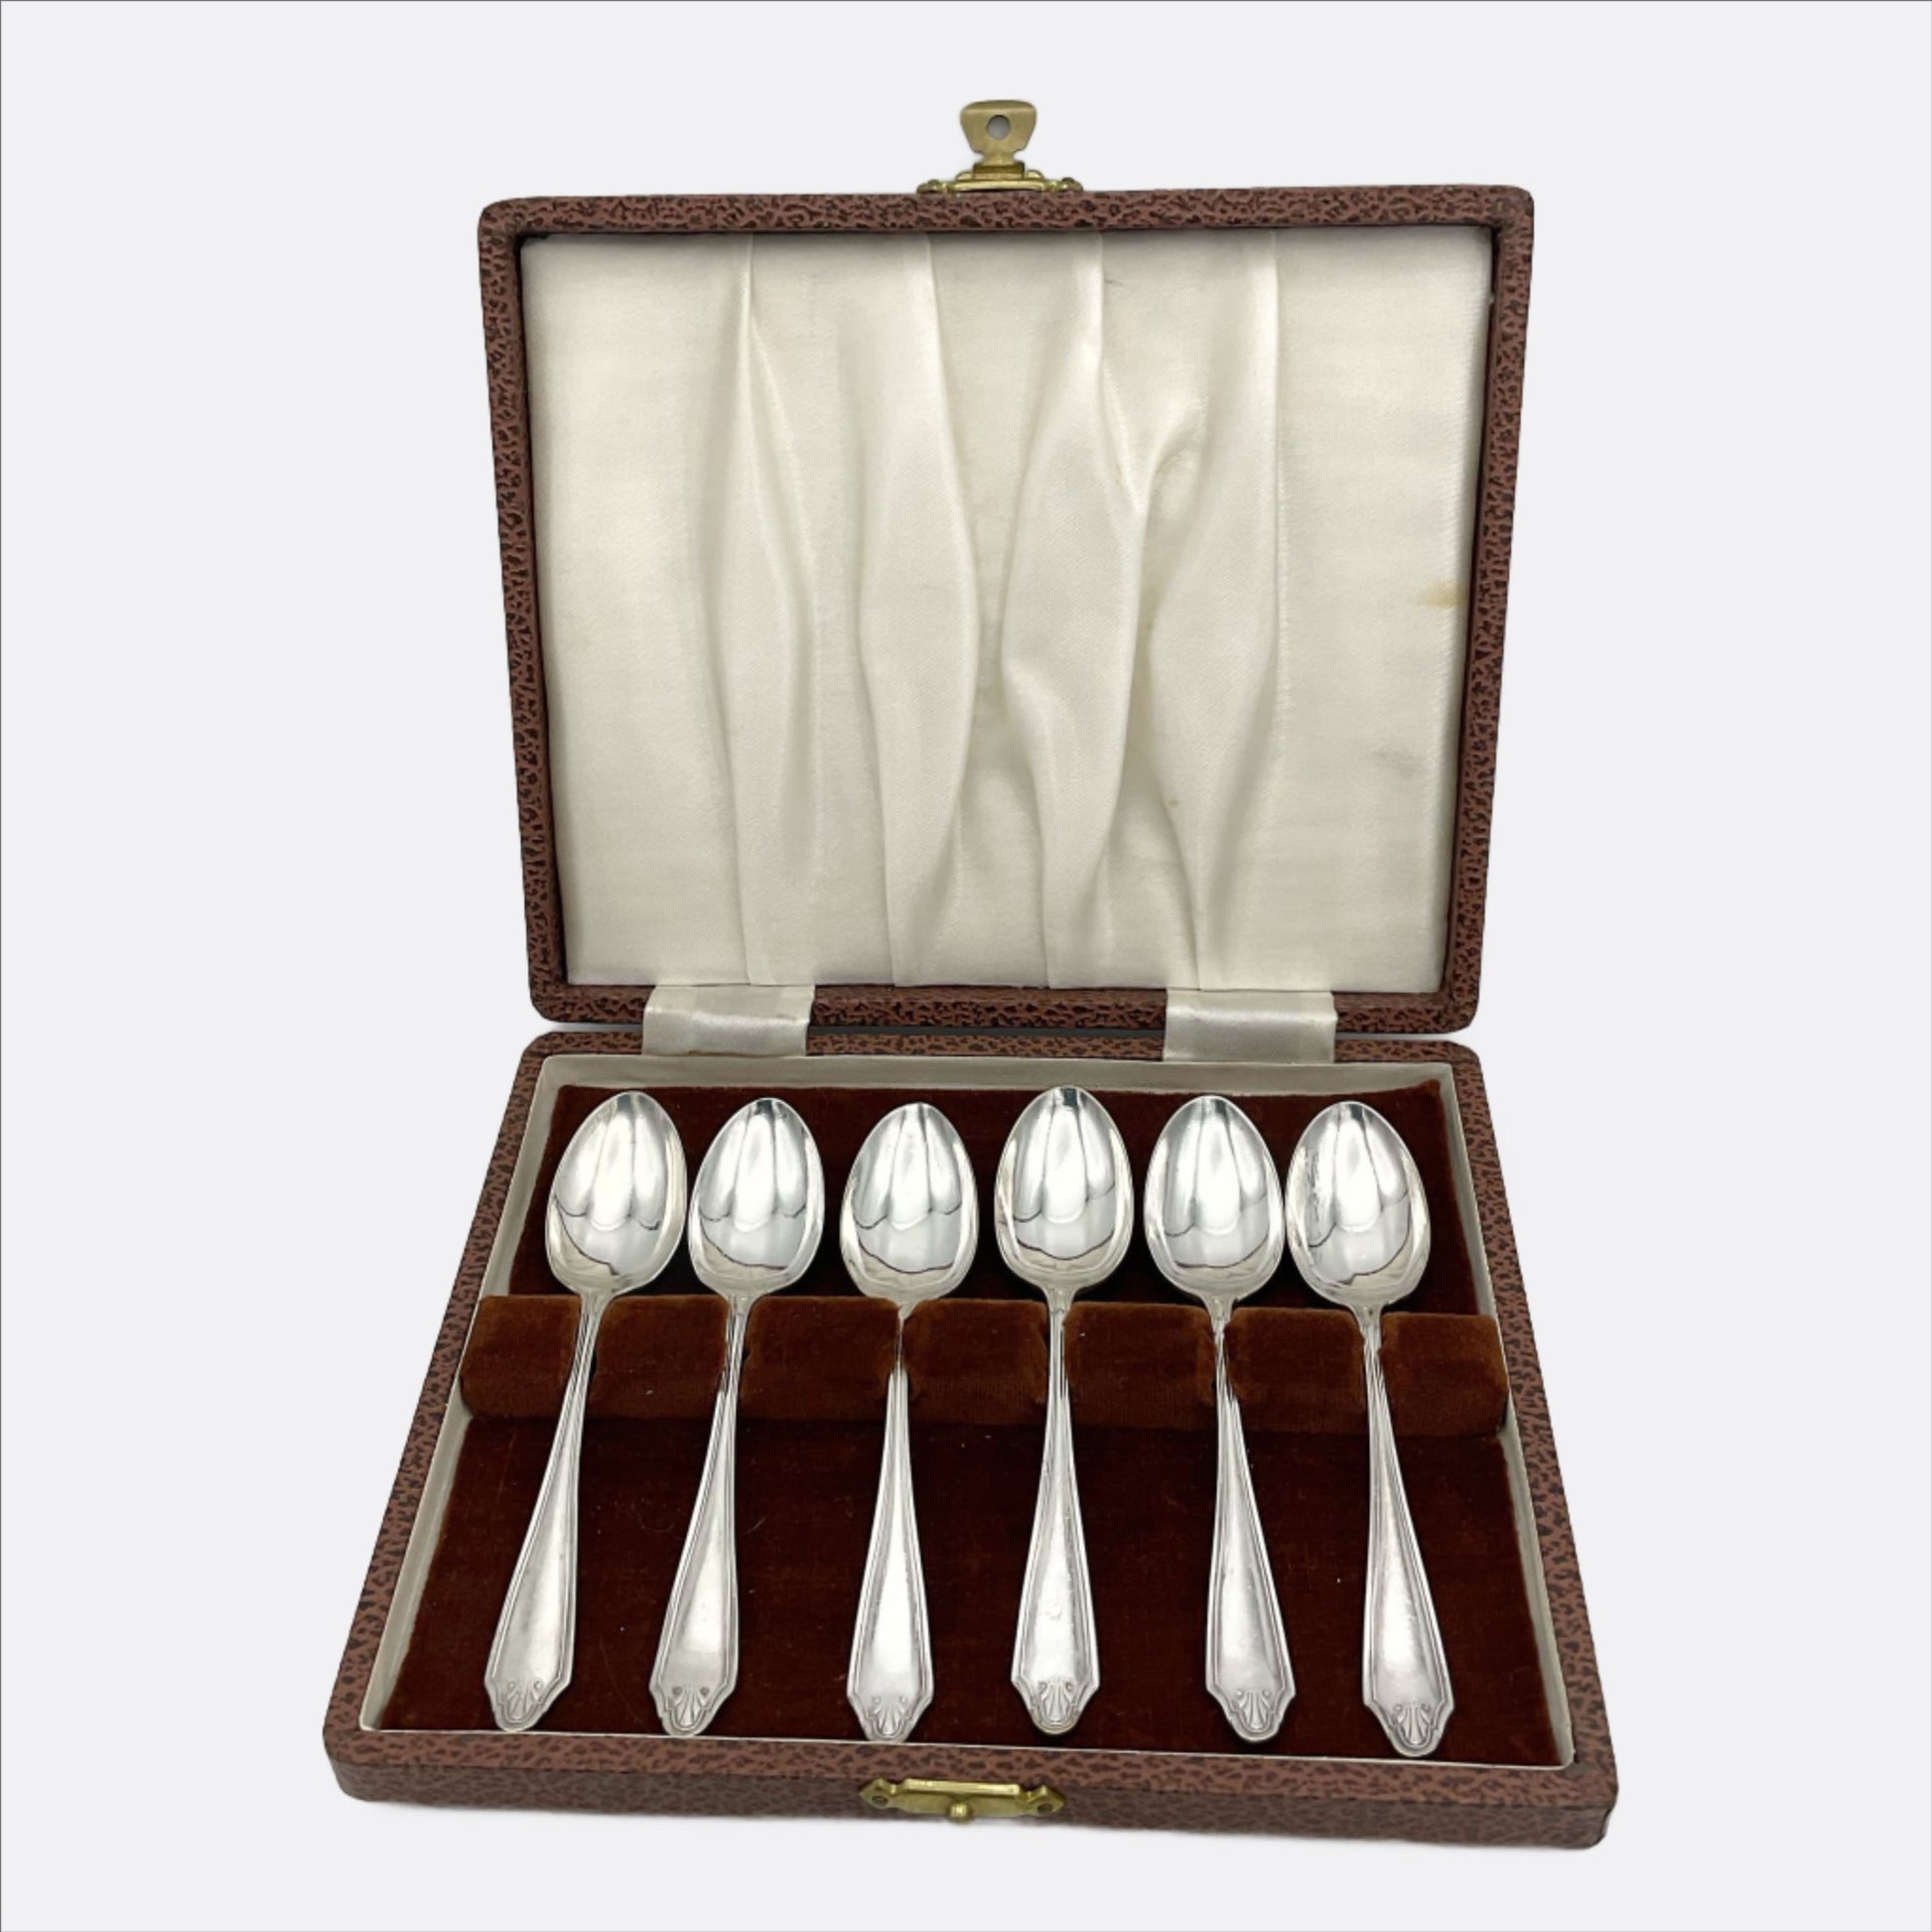 Six matching silver plated coffee spoons in a brown presentation box with a brown and cream interior.